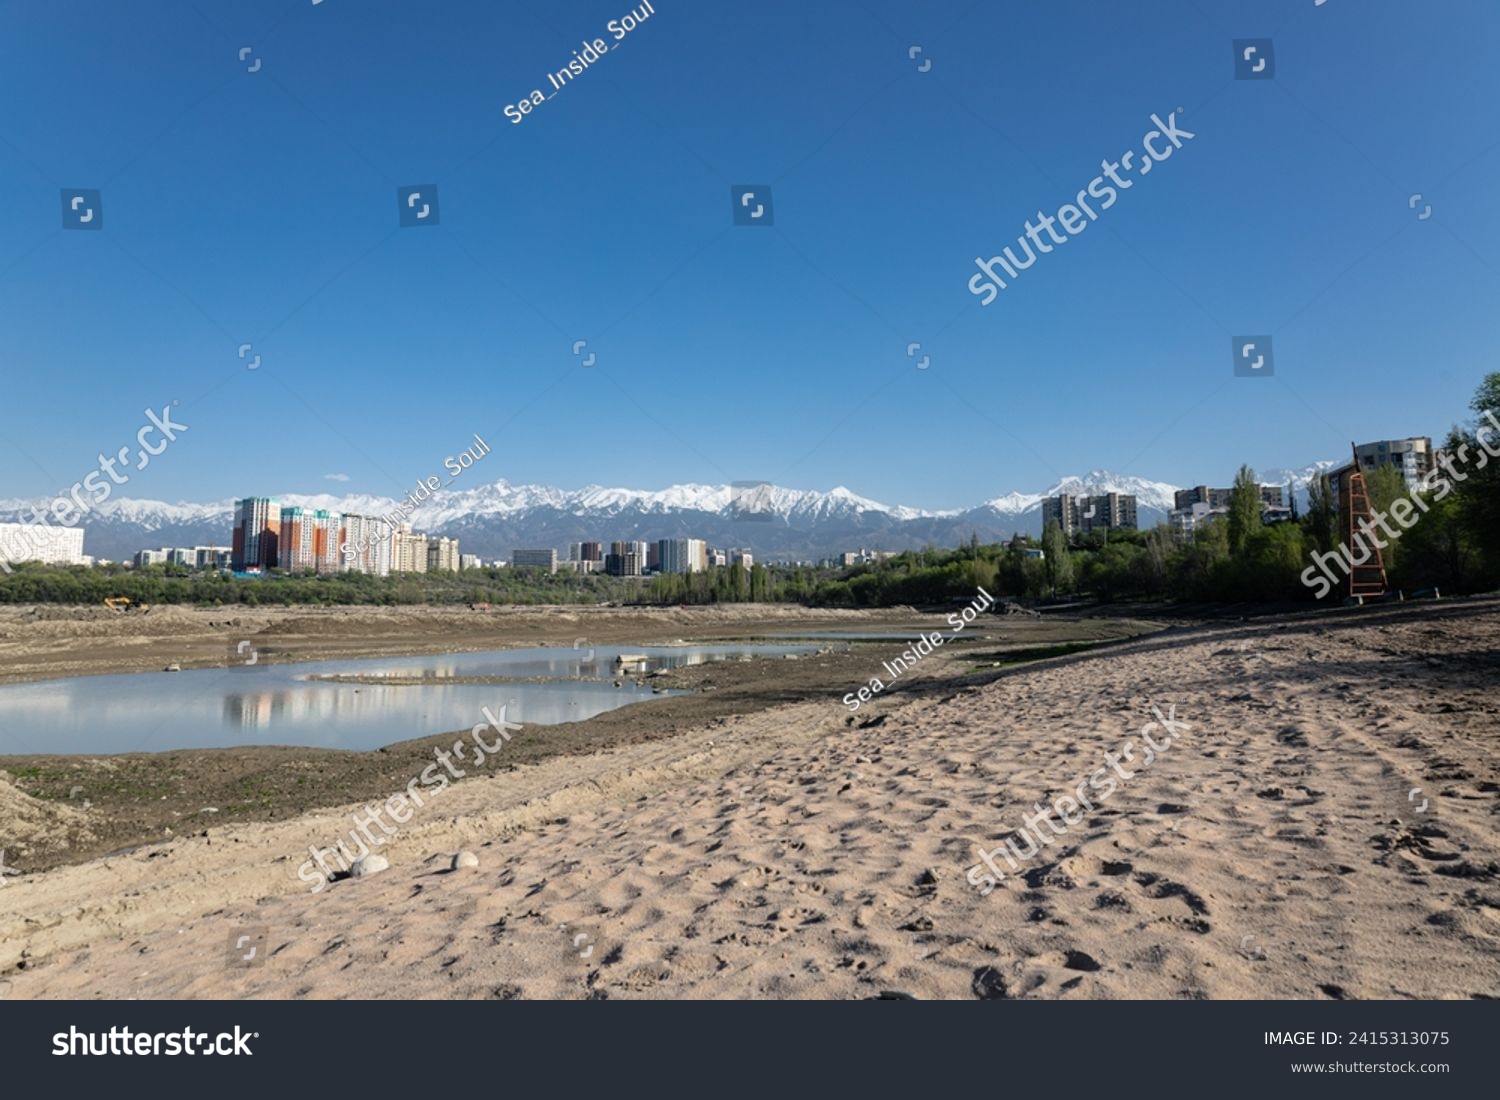 Storage reservoir Lake Sayran, Almaty, Kazakhstan. Empty City sand beach with drained pond. Residential apartment buildings and high snow-capped mountains in background. Recreation place for citizens #2415313075